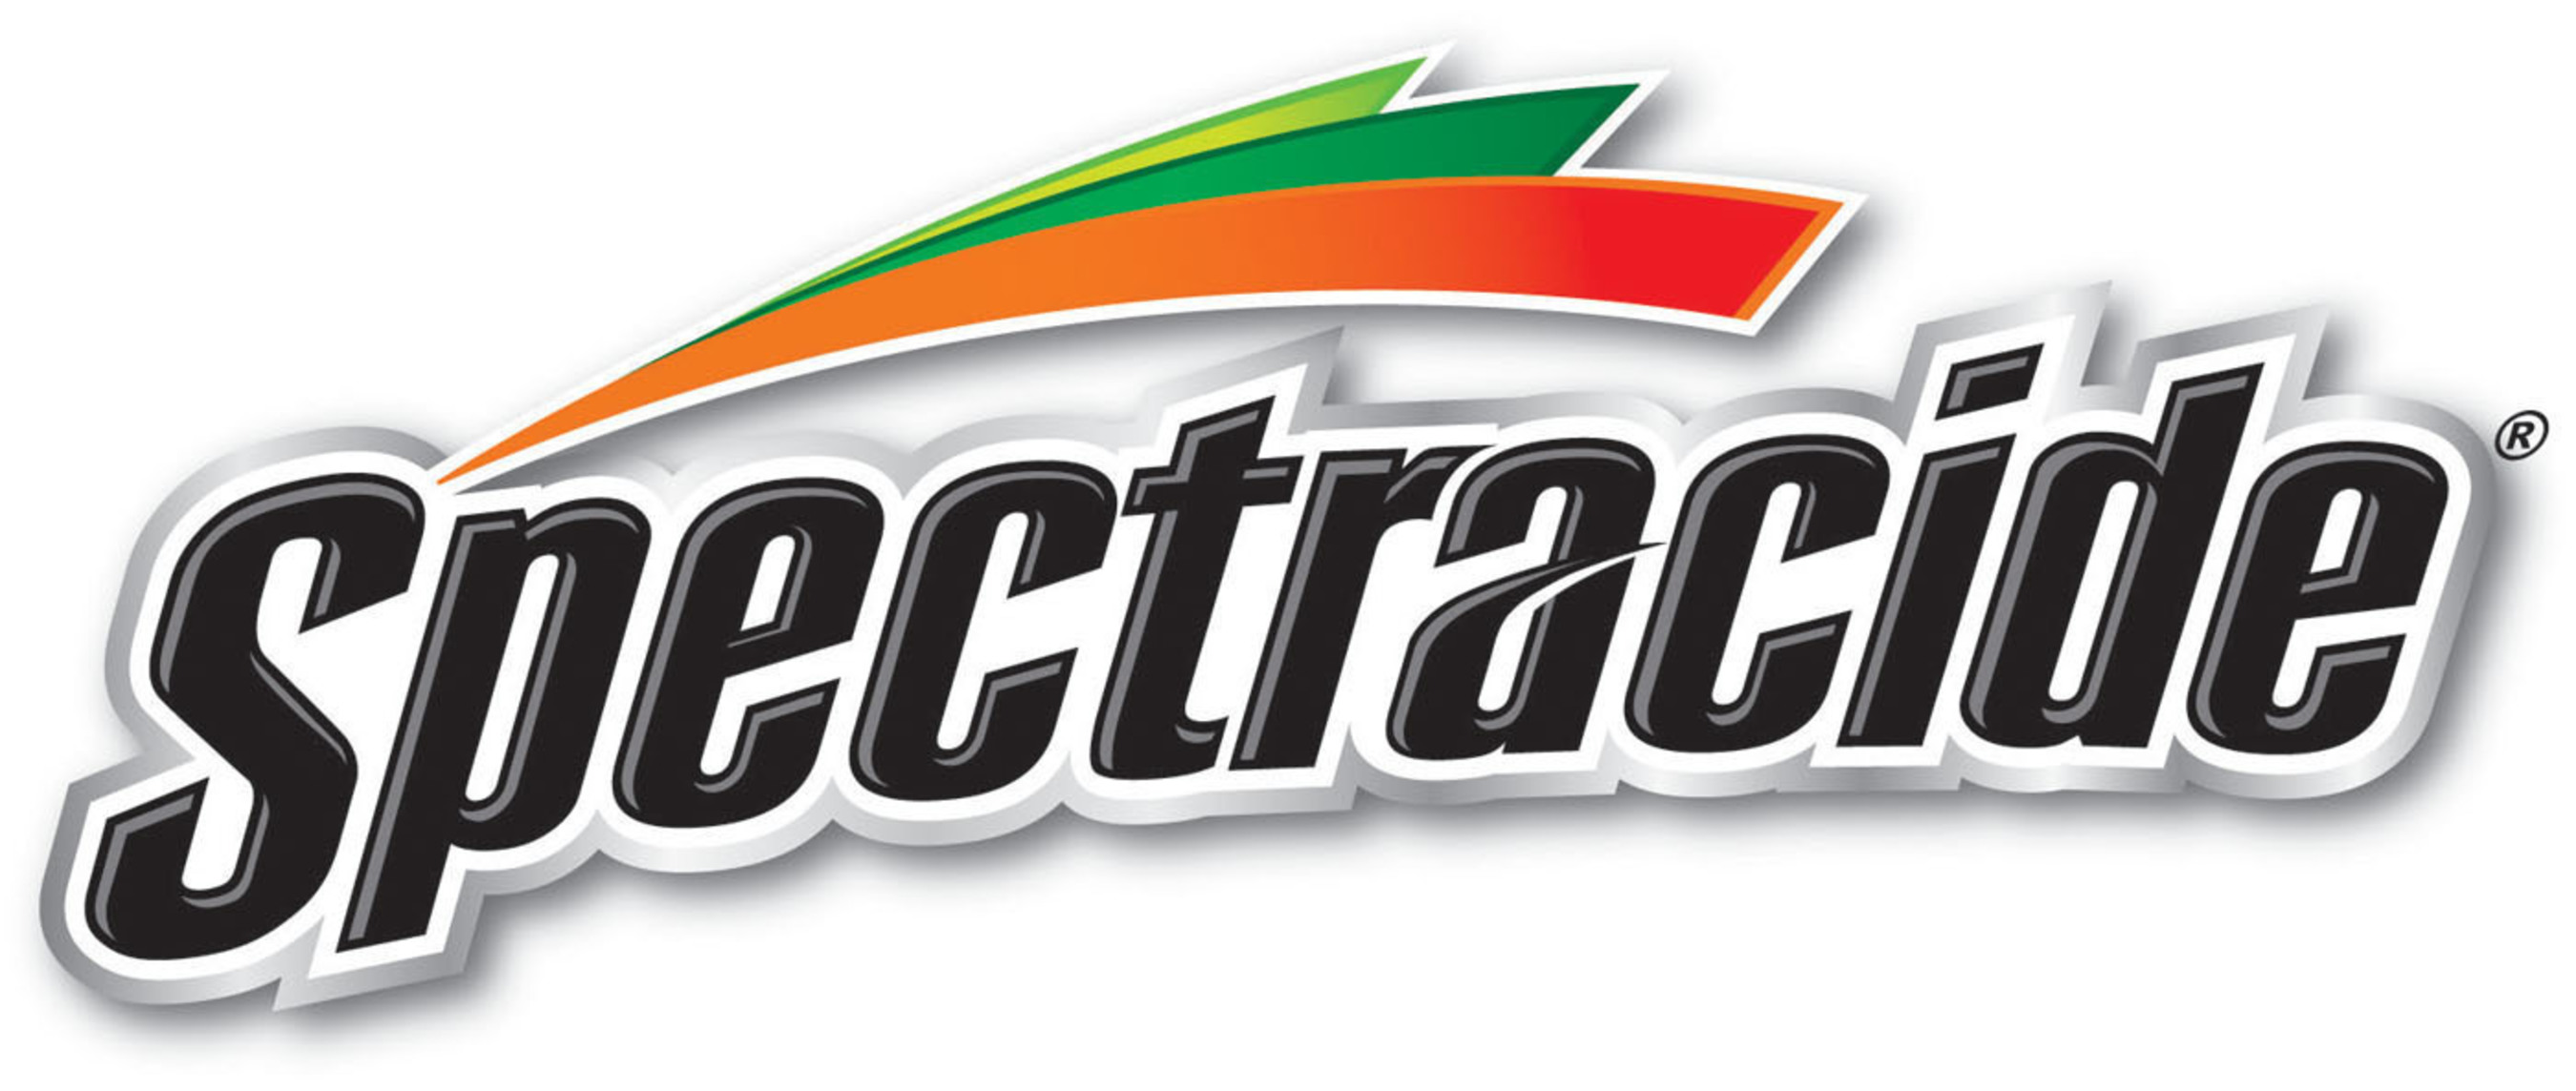 Spectracide brand is a leader in insect and weed control, which offers a variety of indoor and outdoor pest solutions, including weed and grass killer; brush and poison ivy killer; ant, fire ant, Japanese beetle, wasp and hornet protection; rose and flower care; lawn disease control; and more. Spectracide products are produced by United Industries Corporation, a leading supplier of home and garden products, and a subsidiary of Spectrum Brands Holdings, Inc.